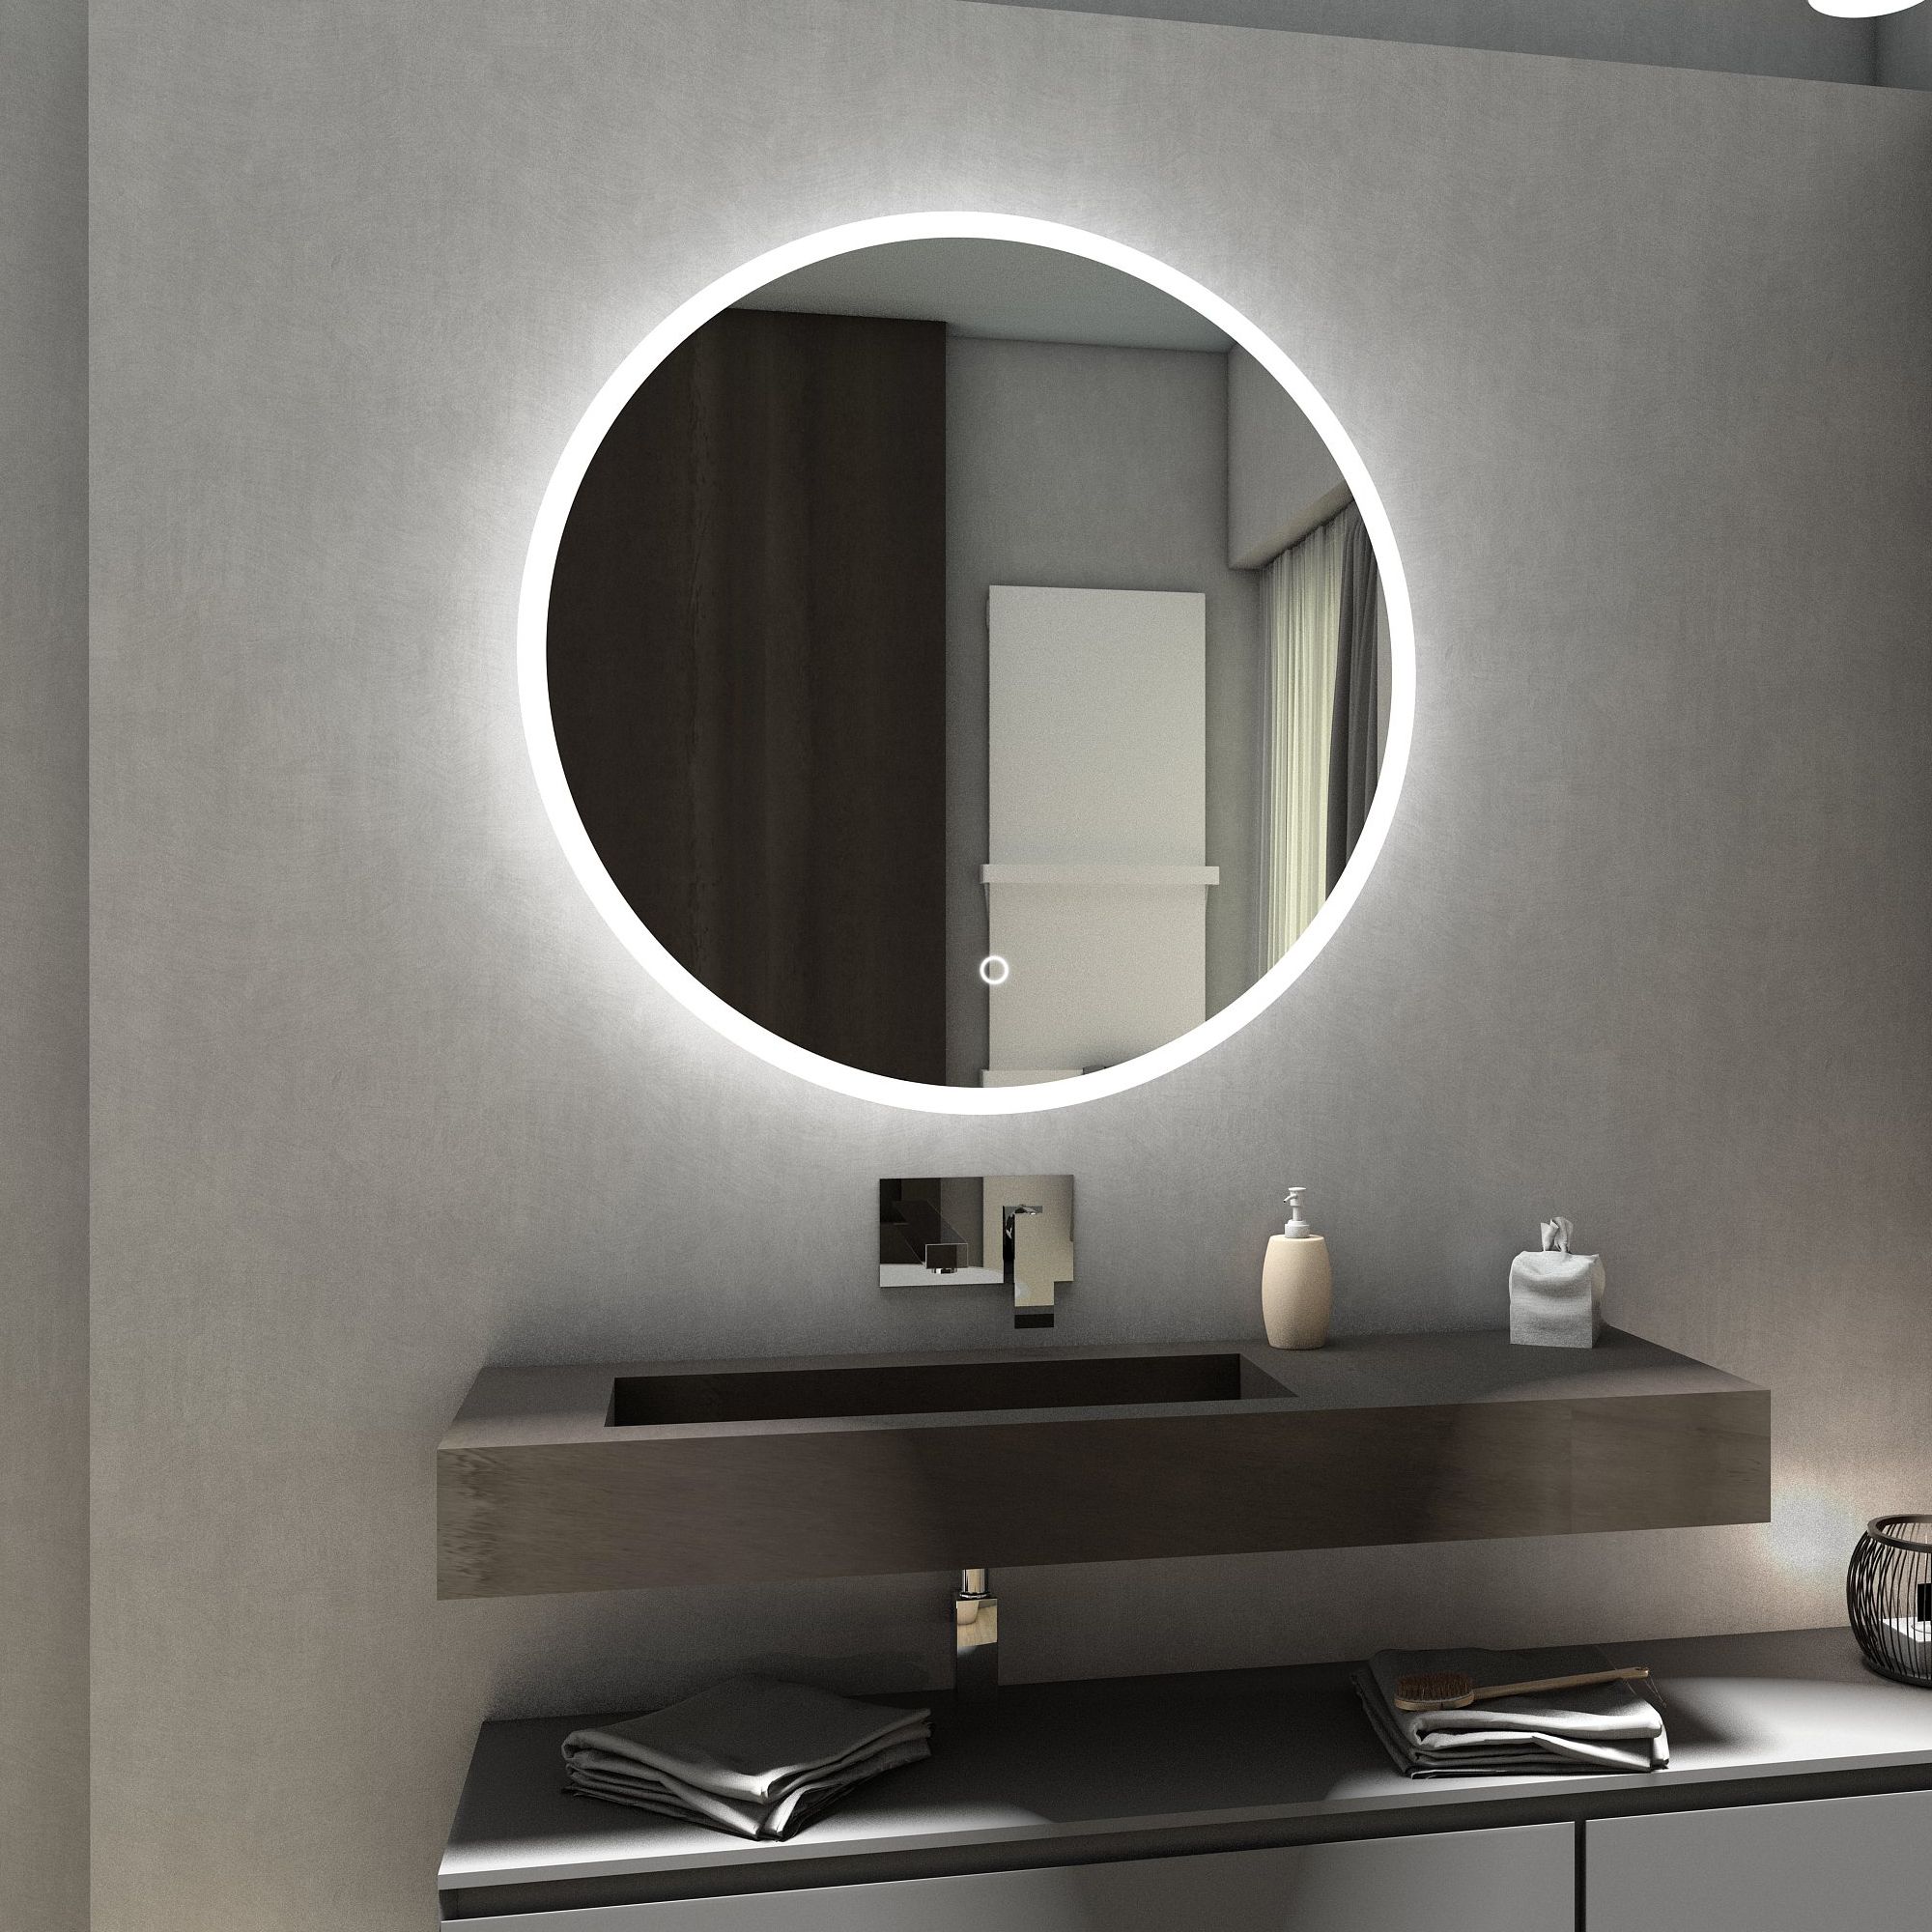 Delhi Round Illuminated Led Bathroom Mirror Wall Mirrors | Switches Regarding Front Lit Led Wall Mirrors (View 7 of 15)